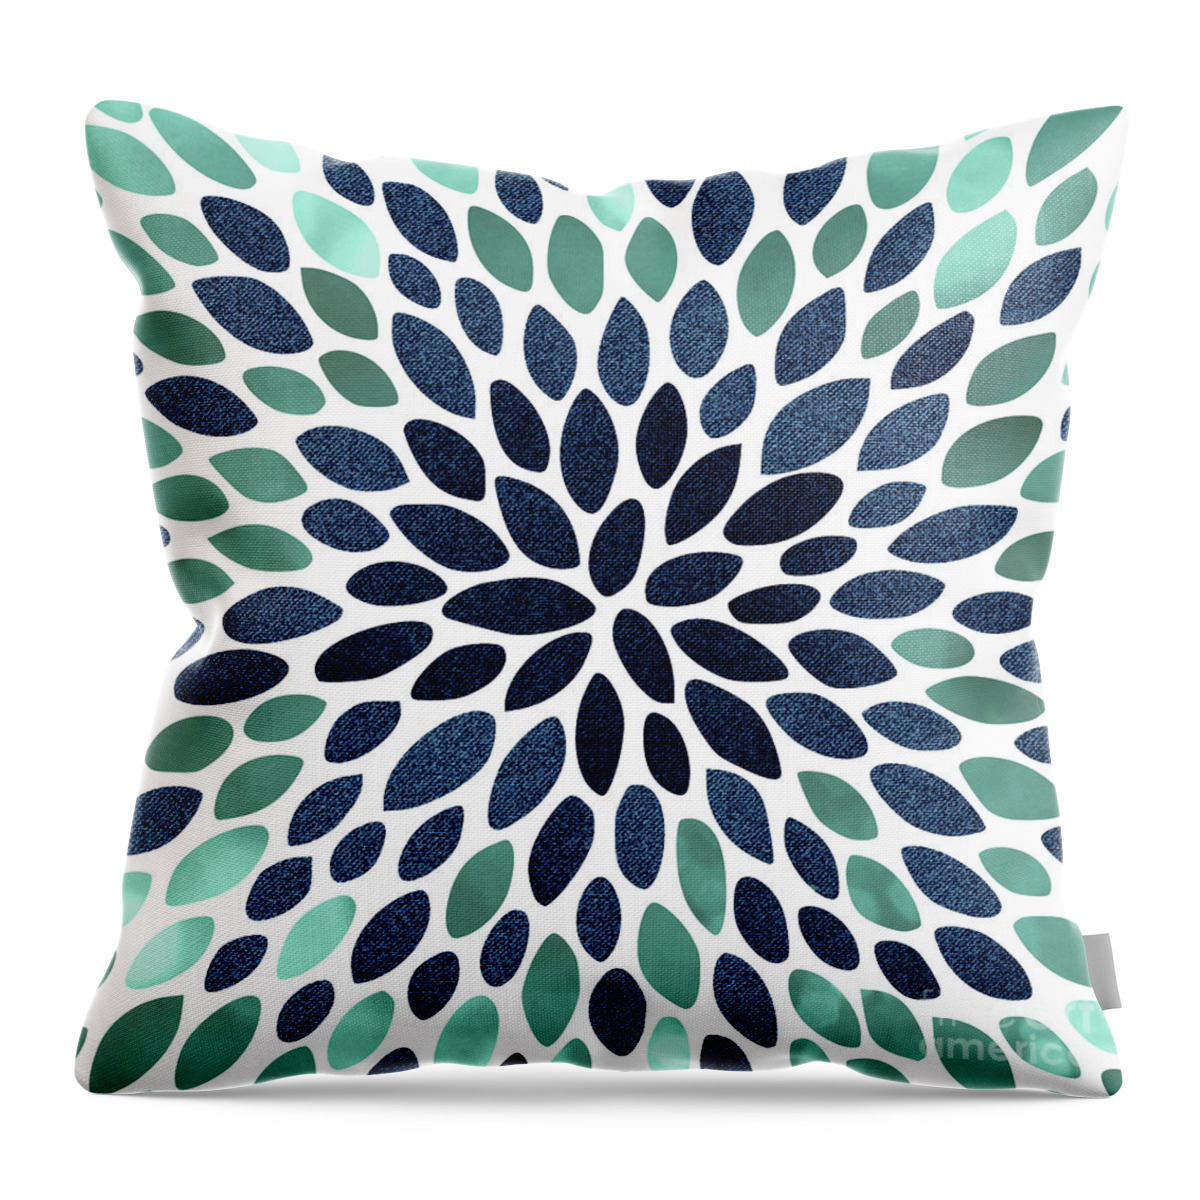 Aqua Turquoise and Gray by Megan Morris on Synthetic King Set of 2 Pillow Teal Floral Pattern 